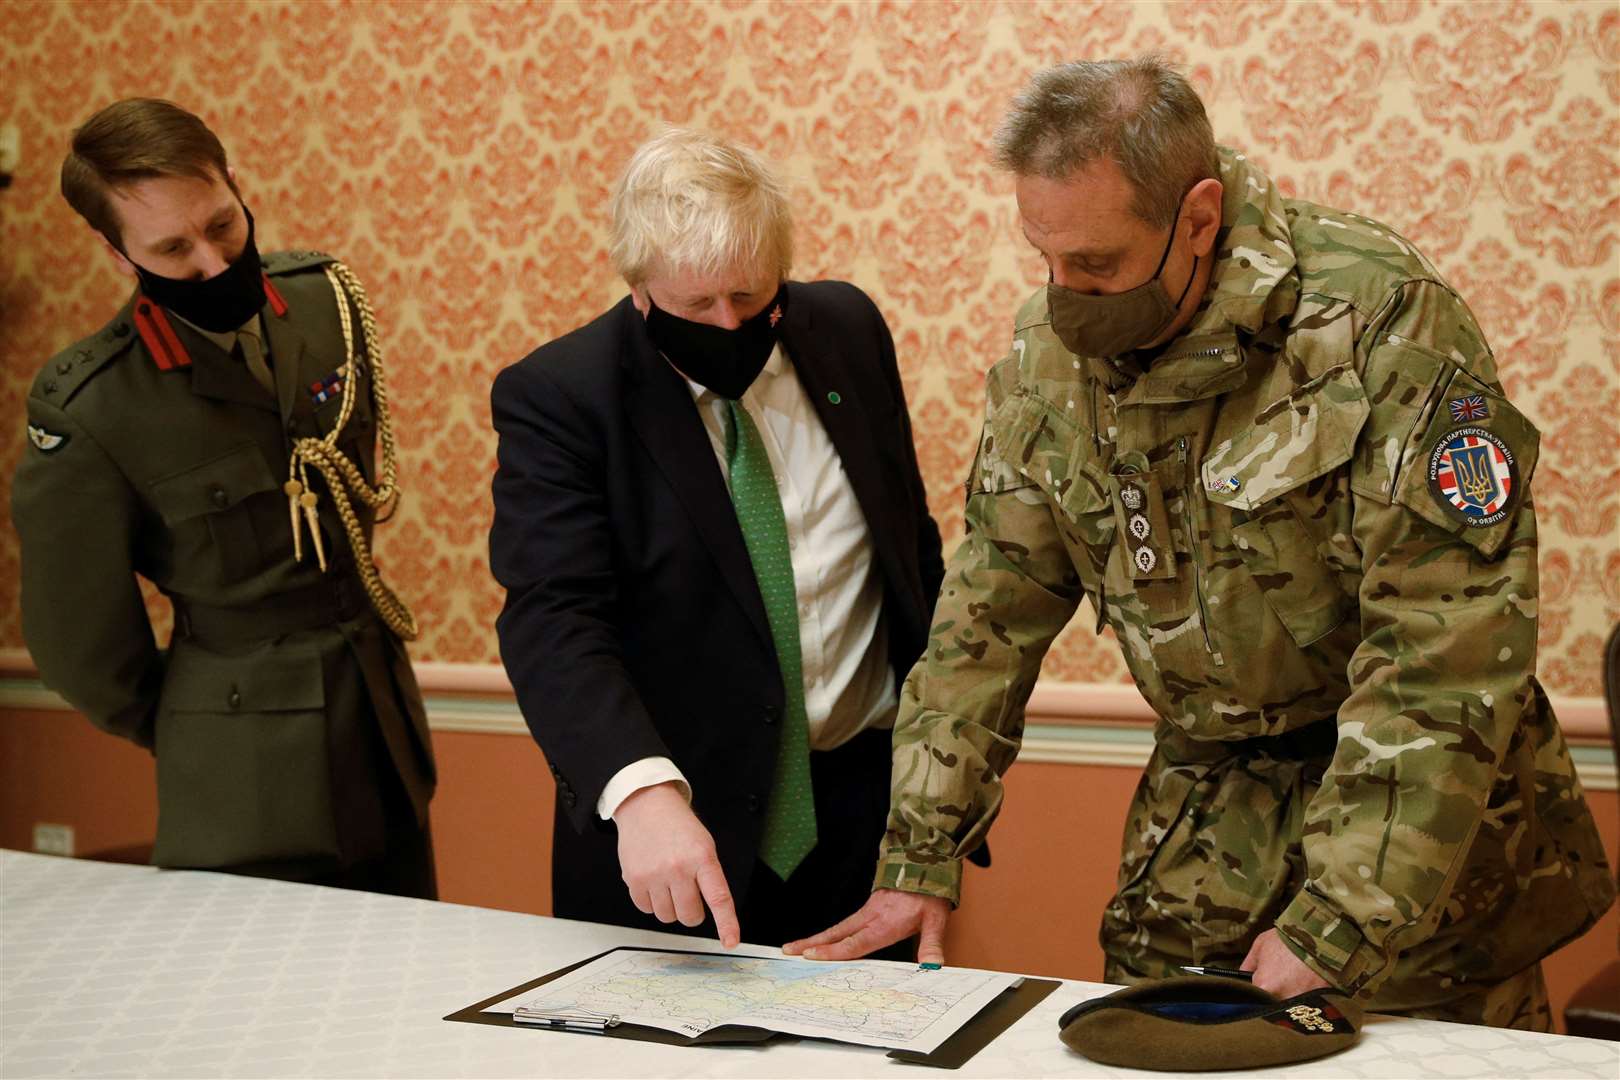 Prime Minister Boris Johnson attends a briefing with Colonel James HF Thurstan, Commander of Operation Orbital in in Kyiv, Ukraine, on February 1 2022 (Peter Nicholls/PA)